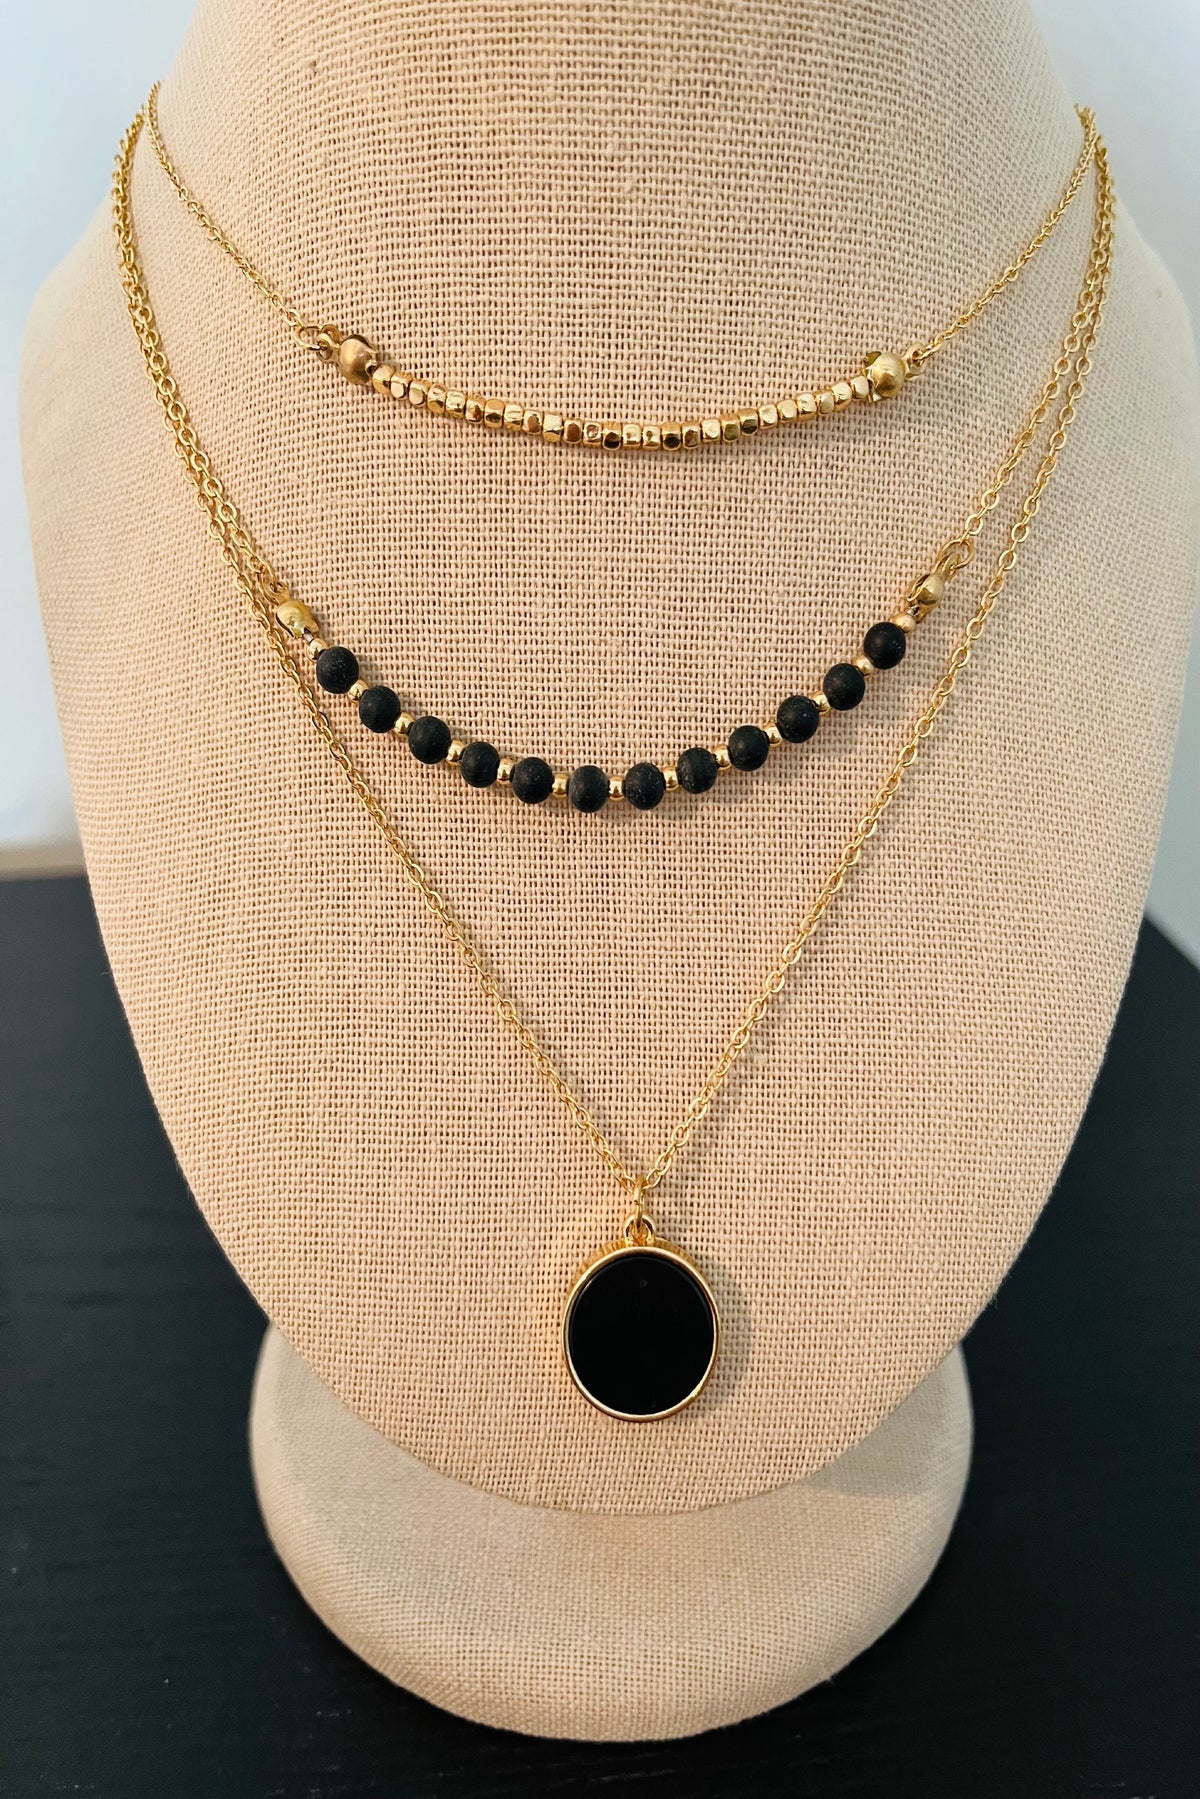 Gold Necklace with Black Pendant